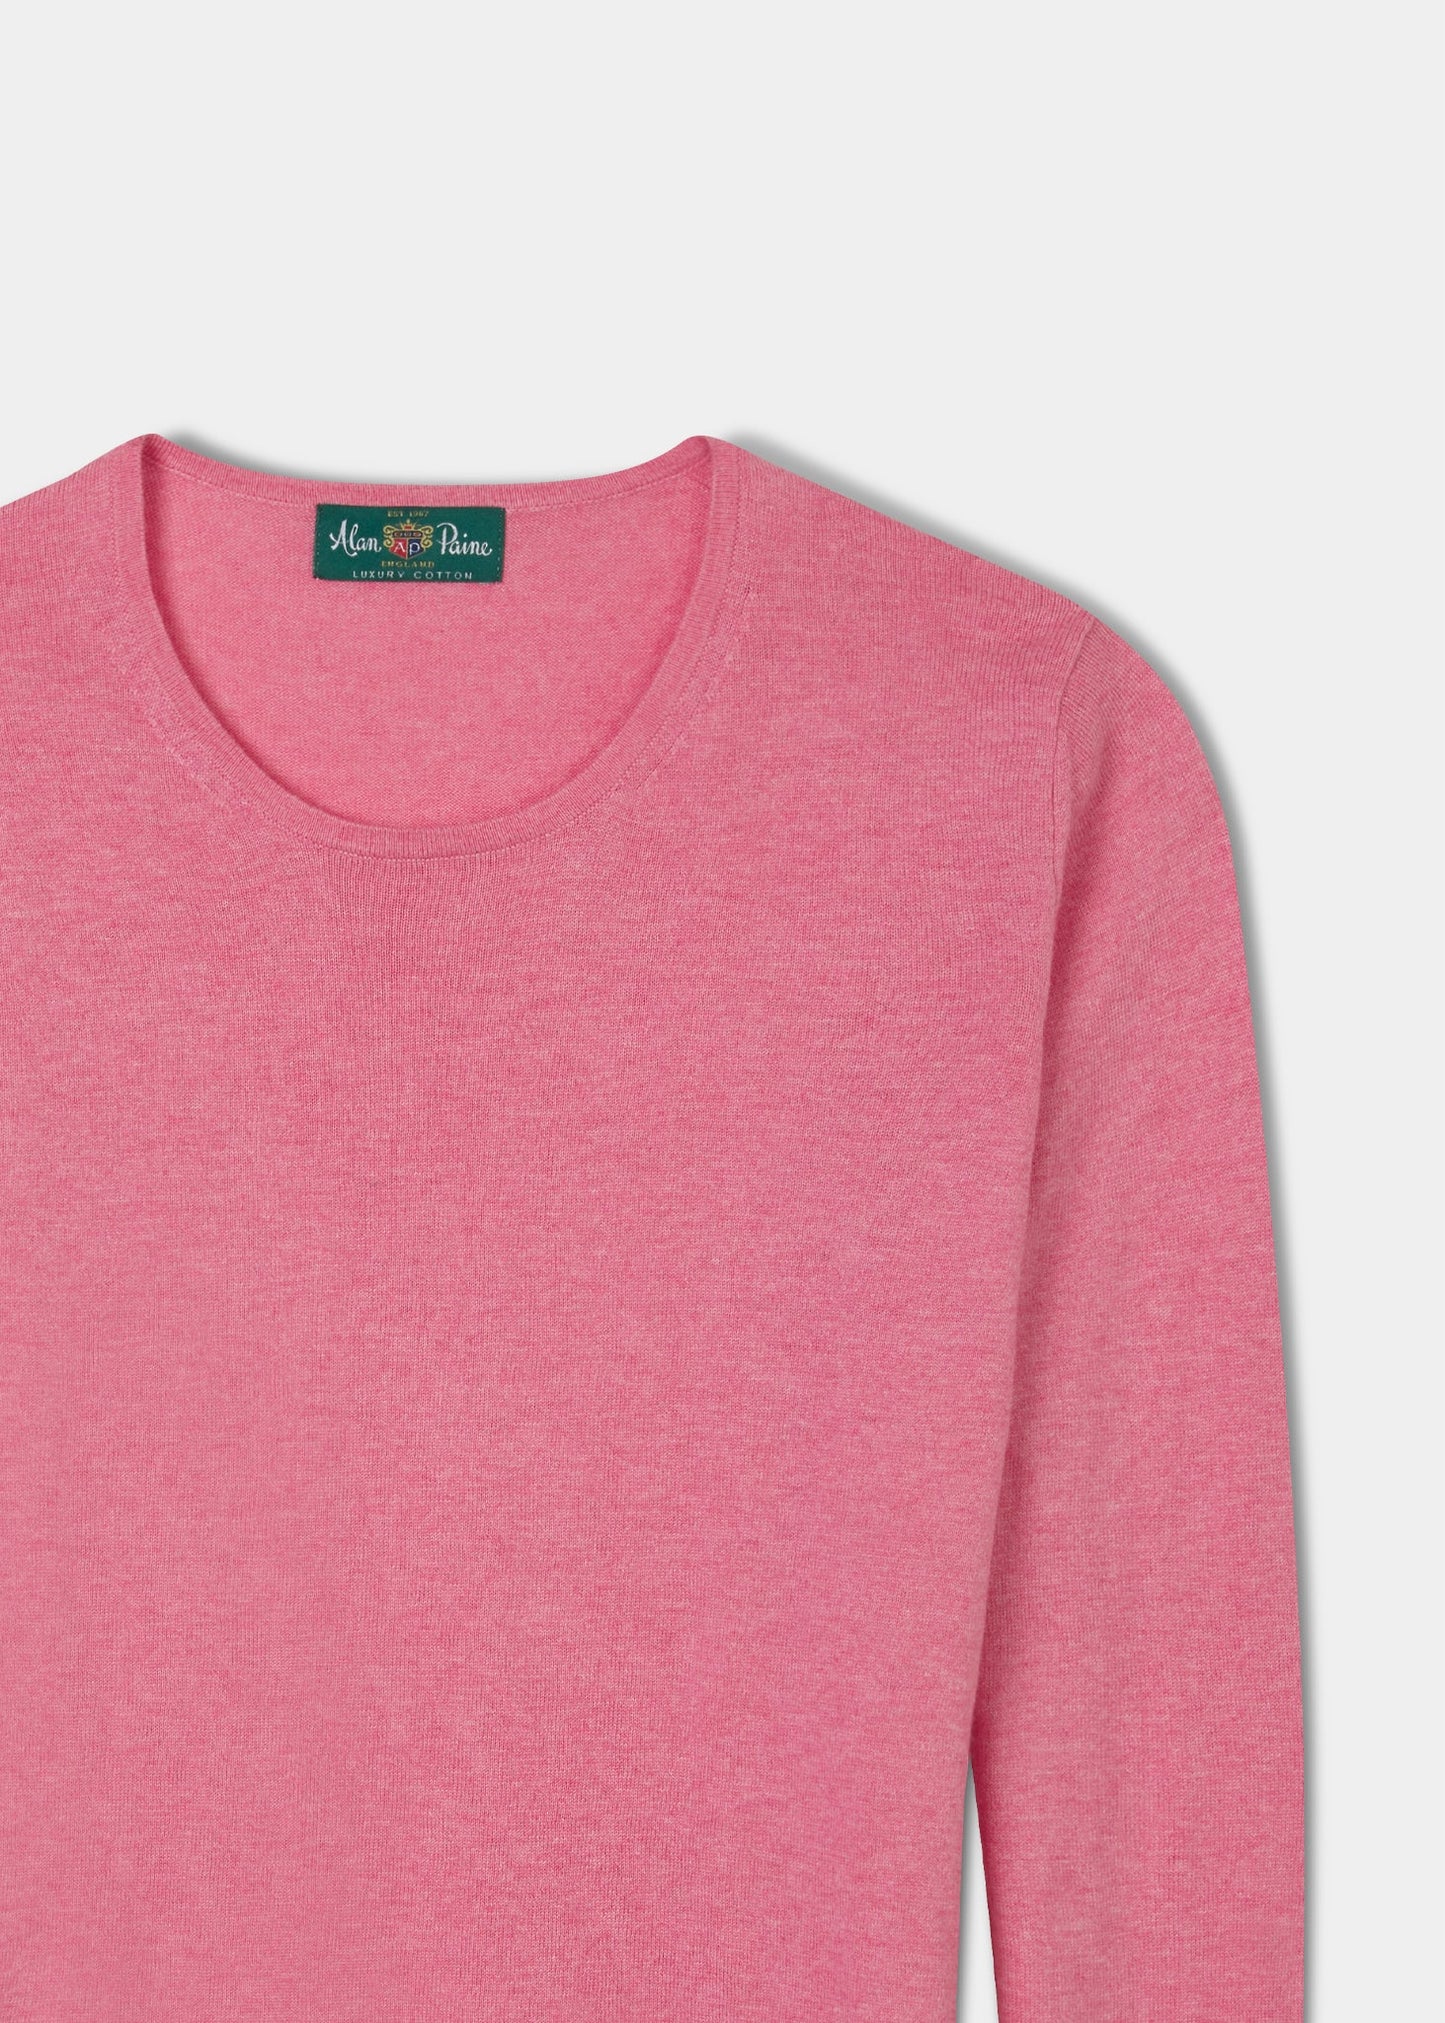 Alan Paine ladies cotton cashmere jumper in colourway carnation with a crew neck